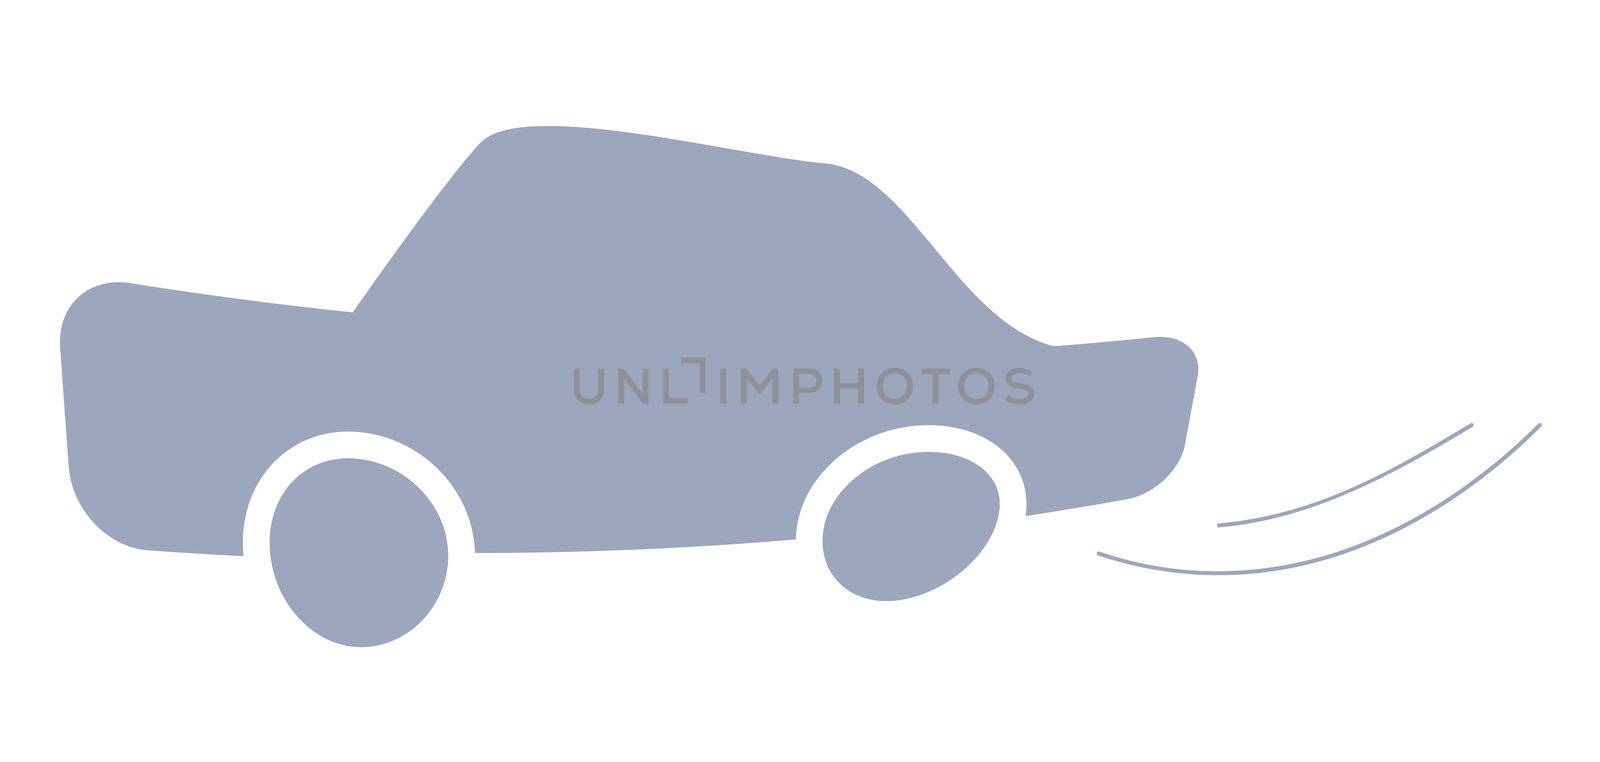 A symbolic illustration of a car. Isolated on white background.